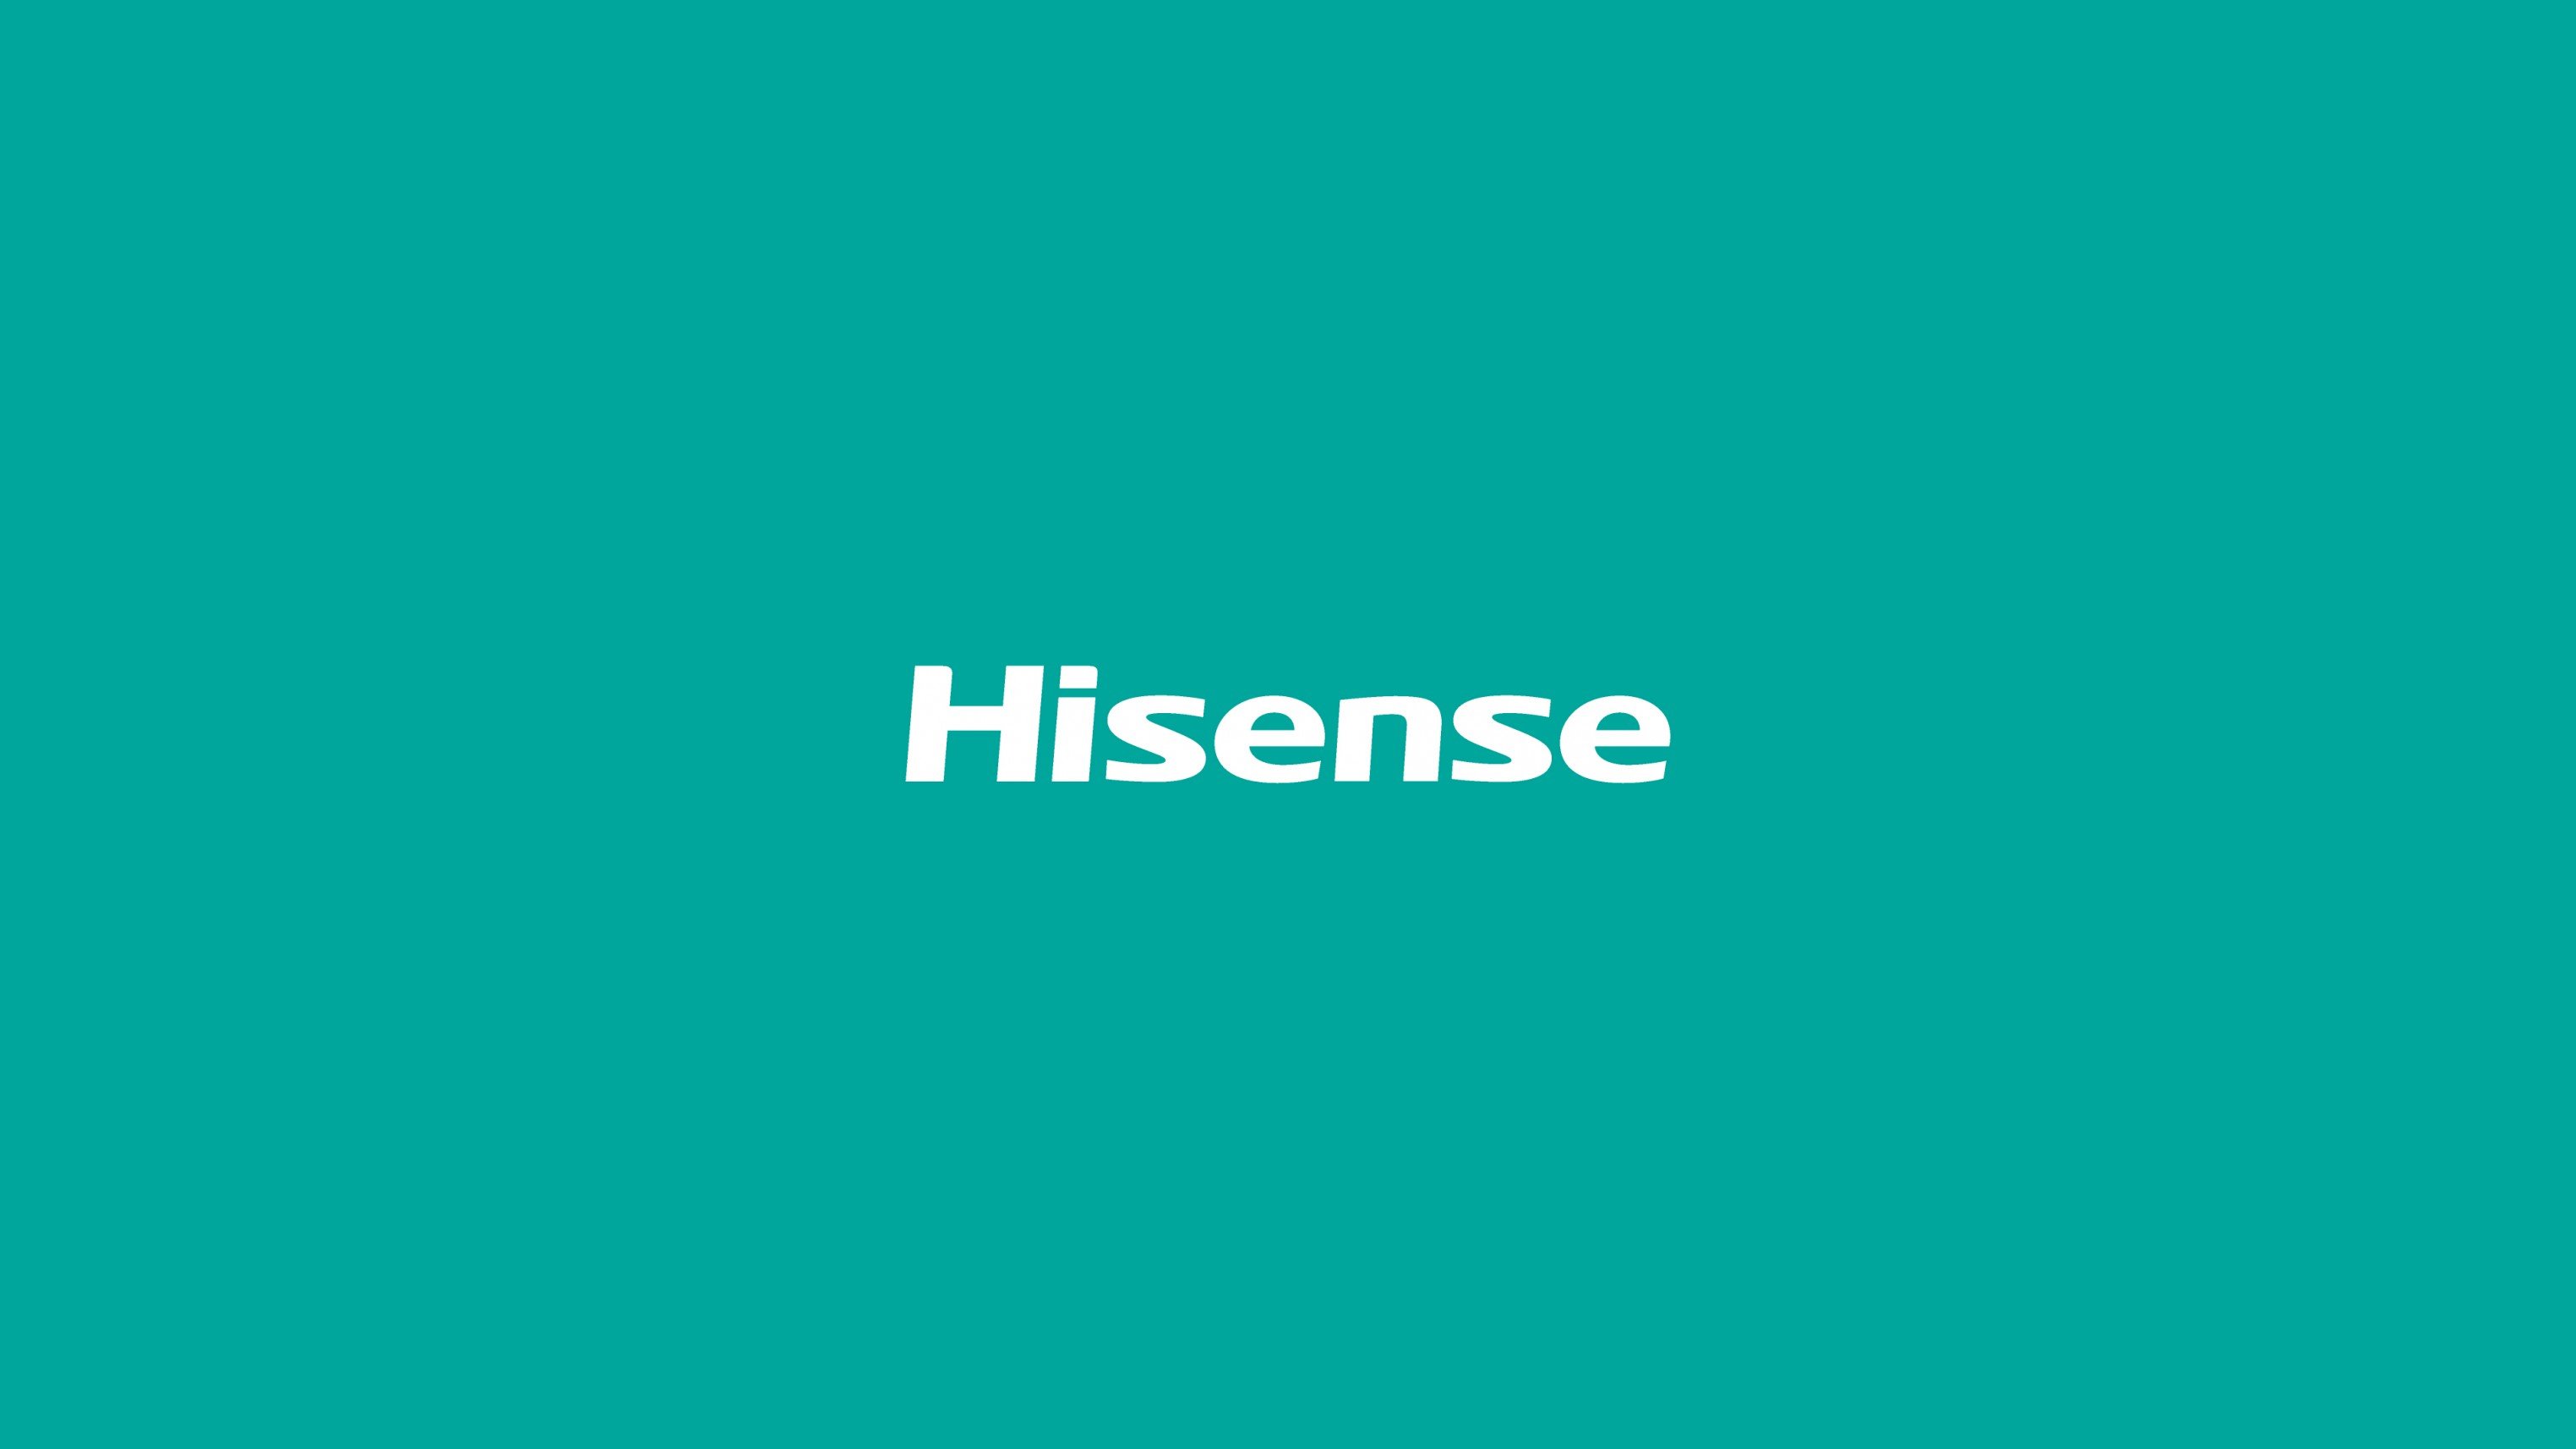 hisense-will-enter-india-on-august-6-with-a-wide-range-of-qled-led